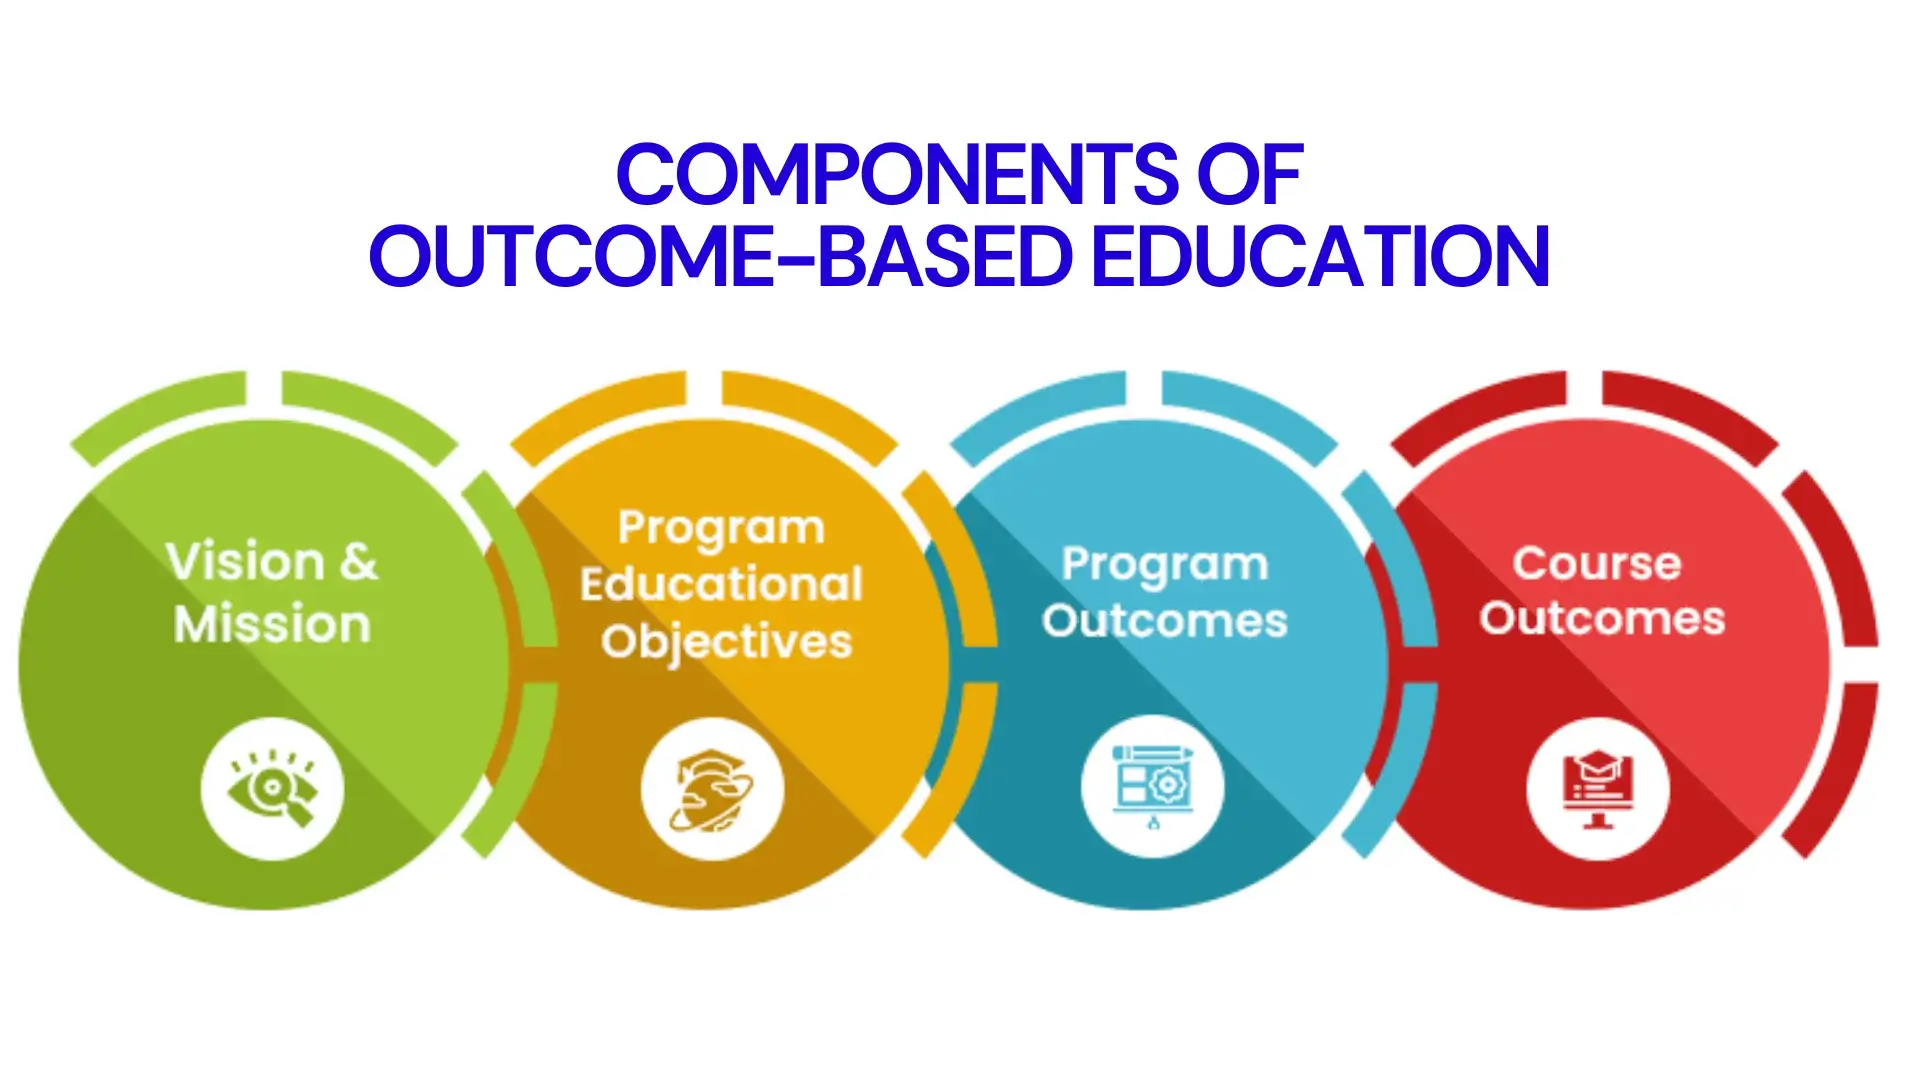 Component of Outcome-Based Education